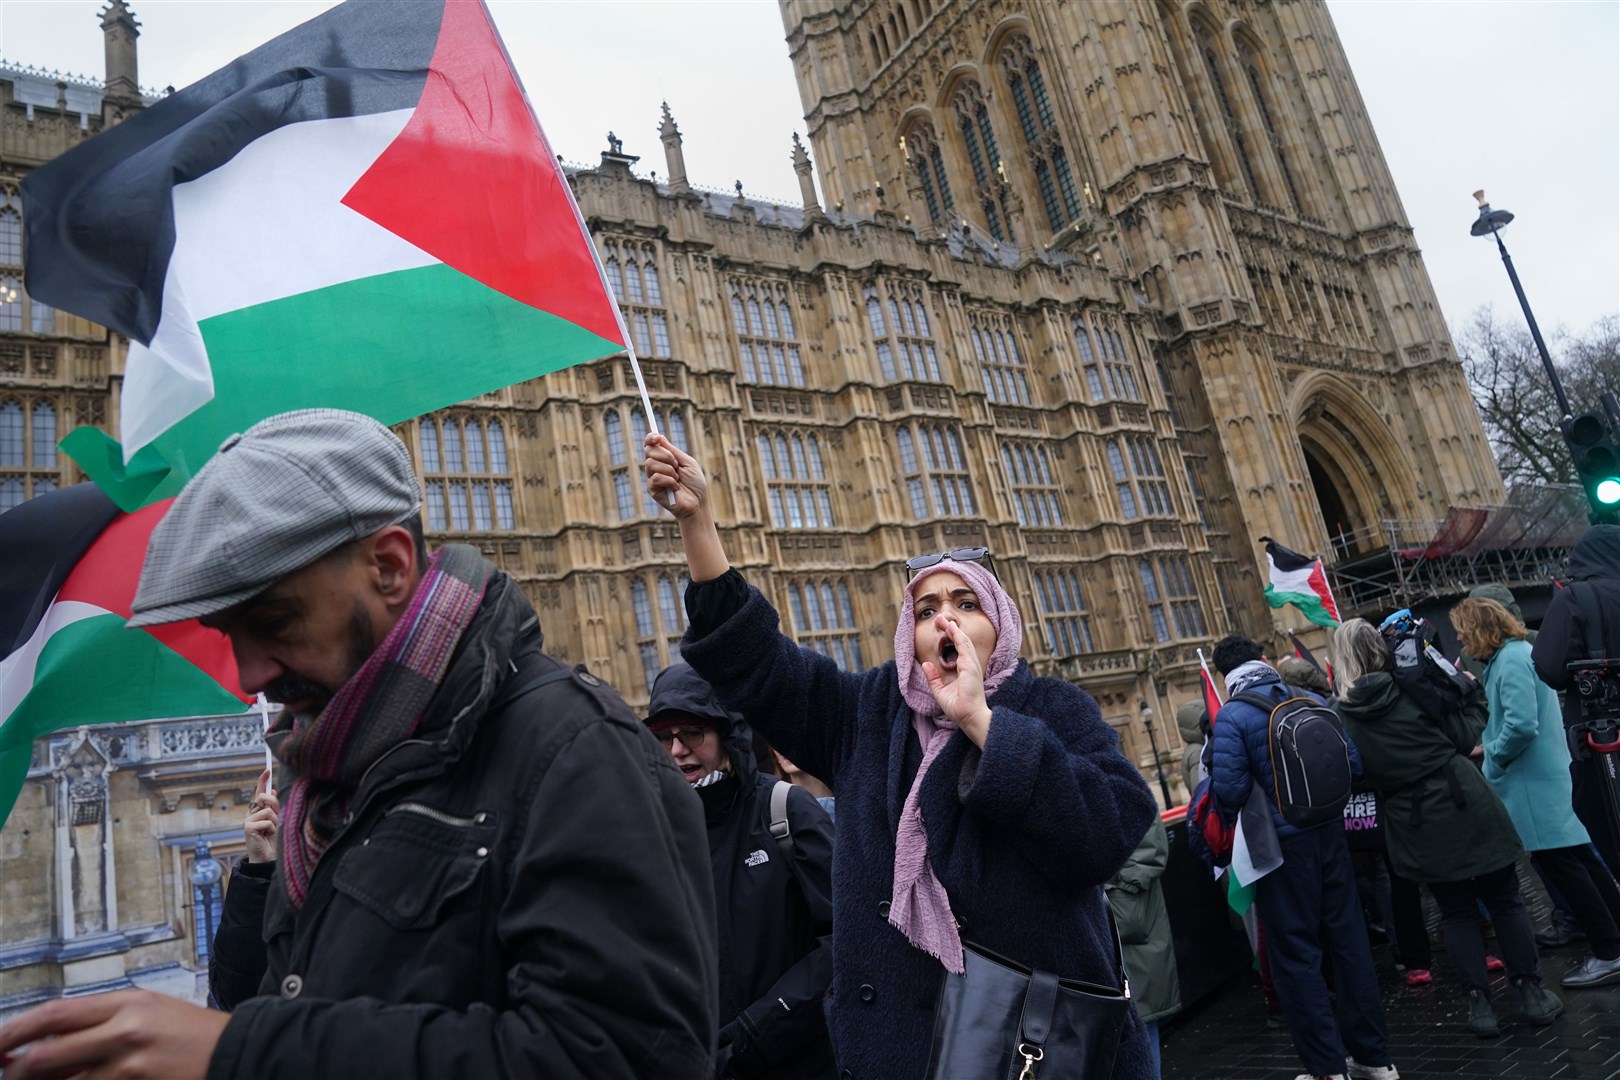 Pro-Palestinian protesters gathered outside Parliament as MPs debated a ceasefire in Gaza (Lucy North/PA)